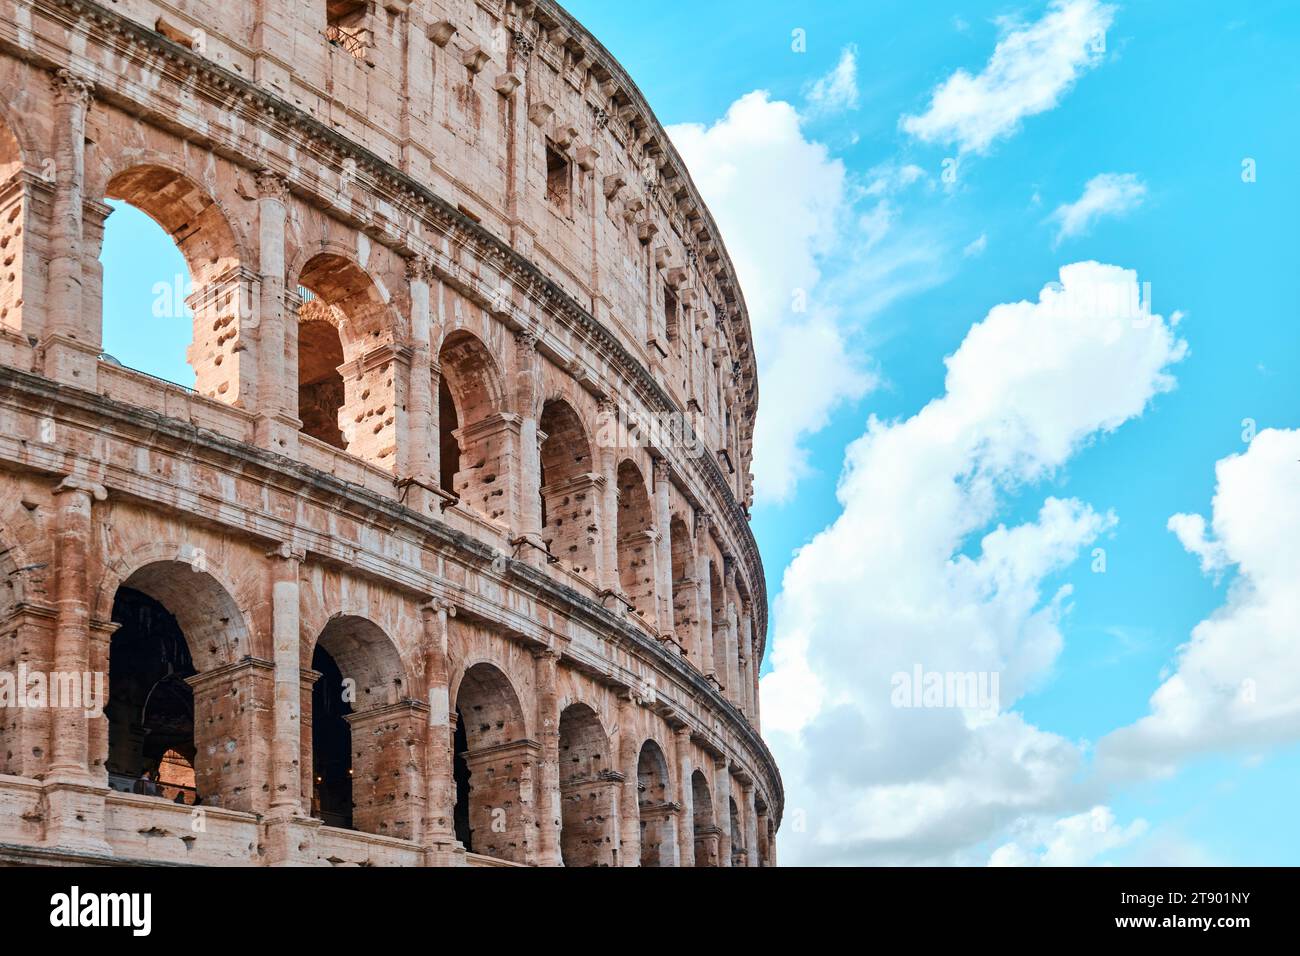 Rome, Italy - November 4 2023: The Colosseum, Architectural wonder of Roman Empire (Colosseo) with blue sky background and clouds Stock Photo